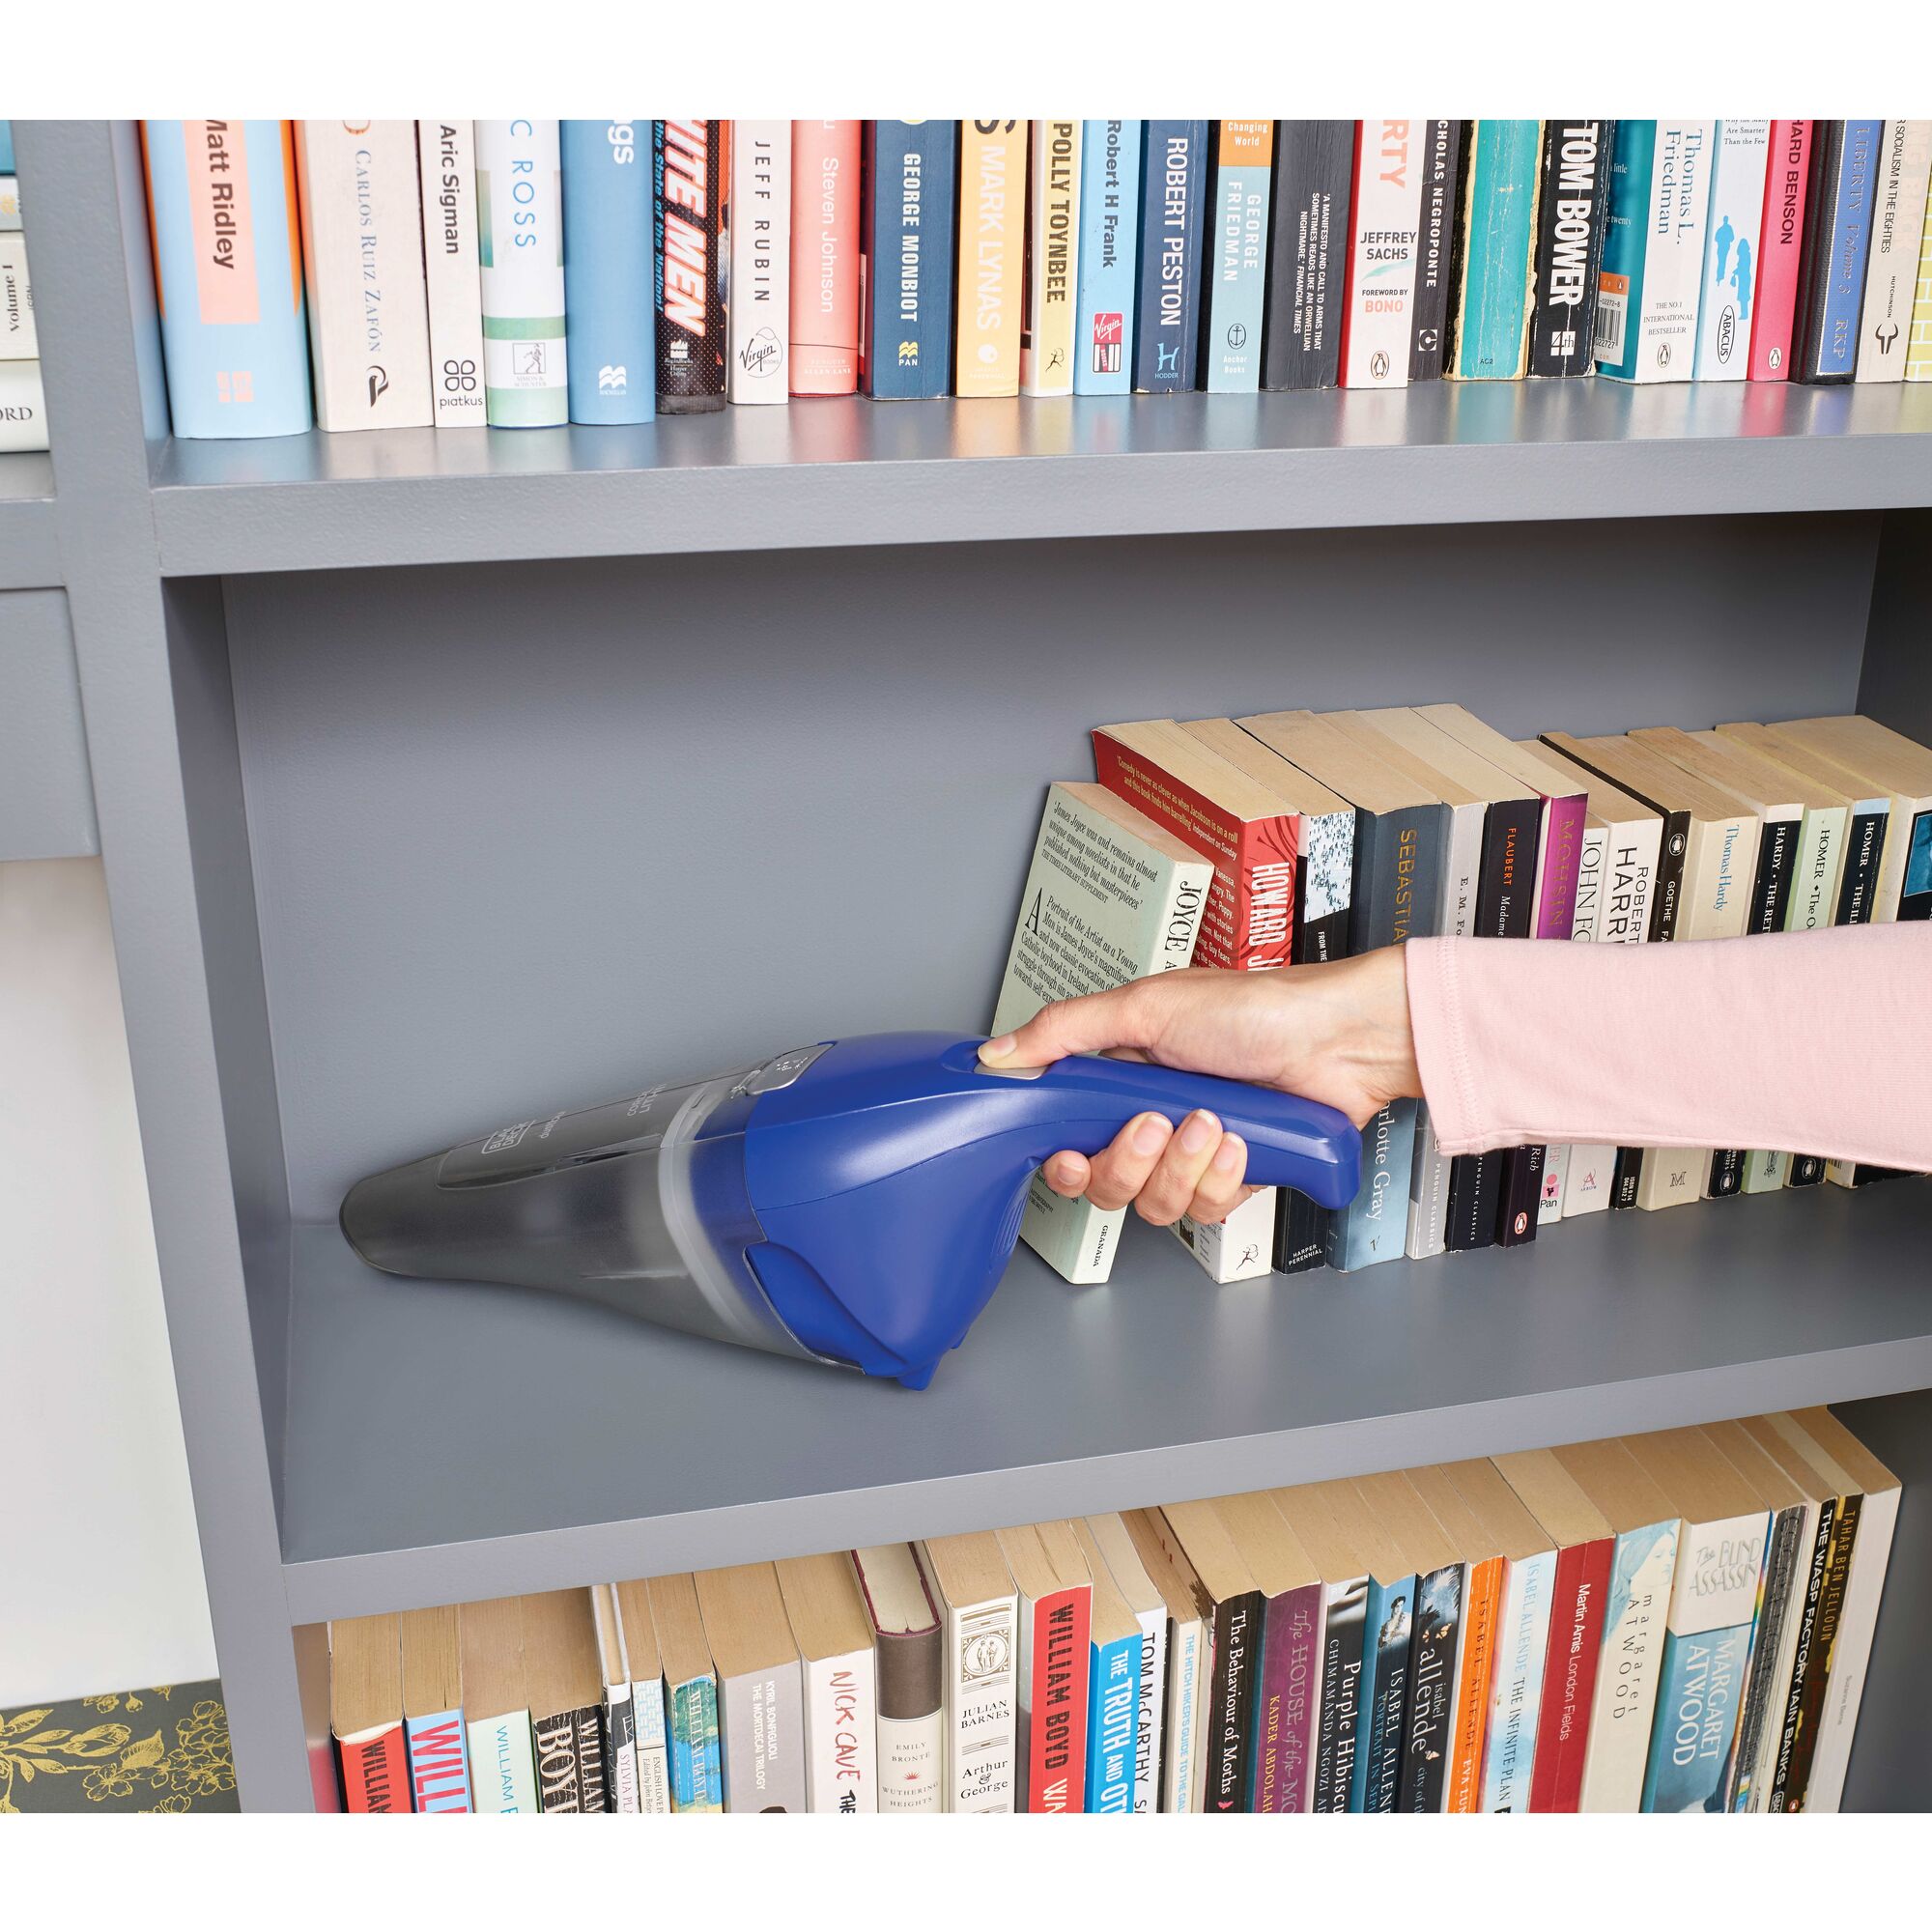 Dustbuster QuickClean Cordless Handheld Vacuum being used to remove dust from bookshelf.